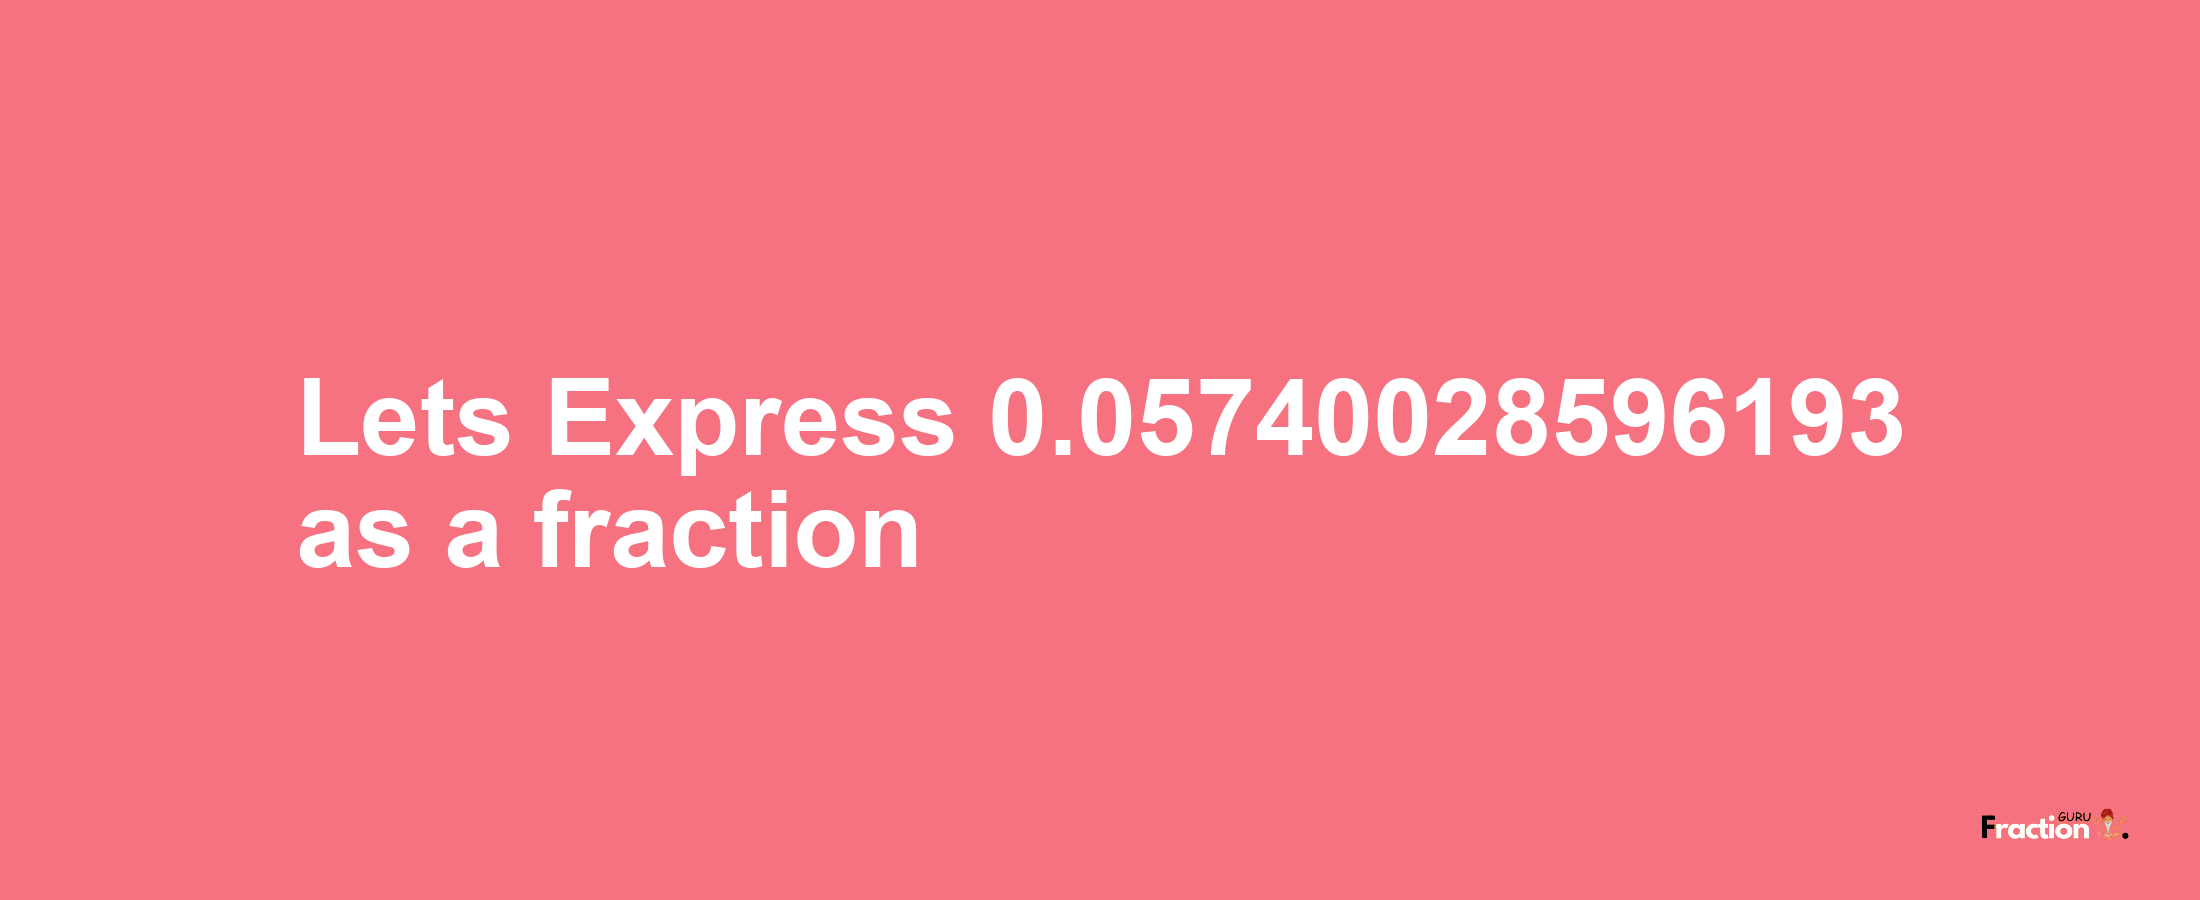 Lets Express 0.05740028596193 as afraction